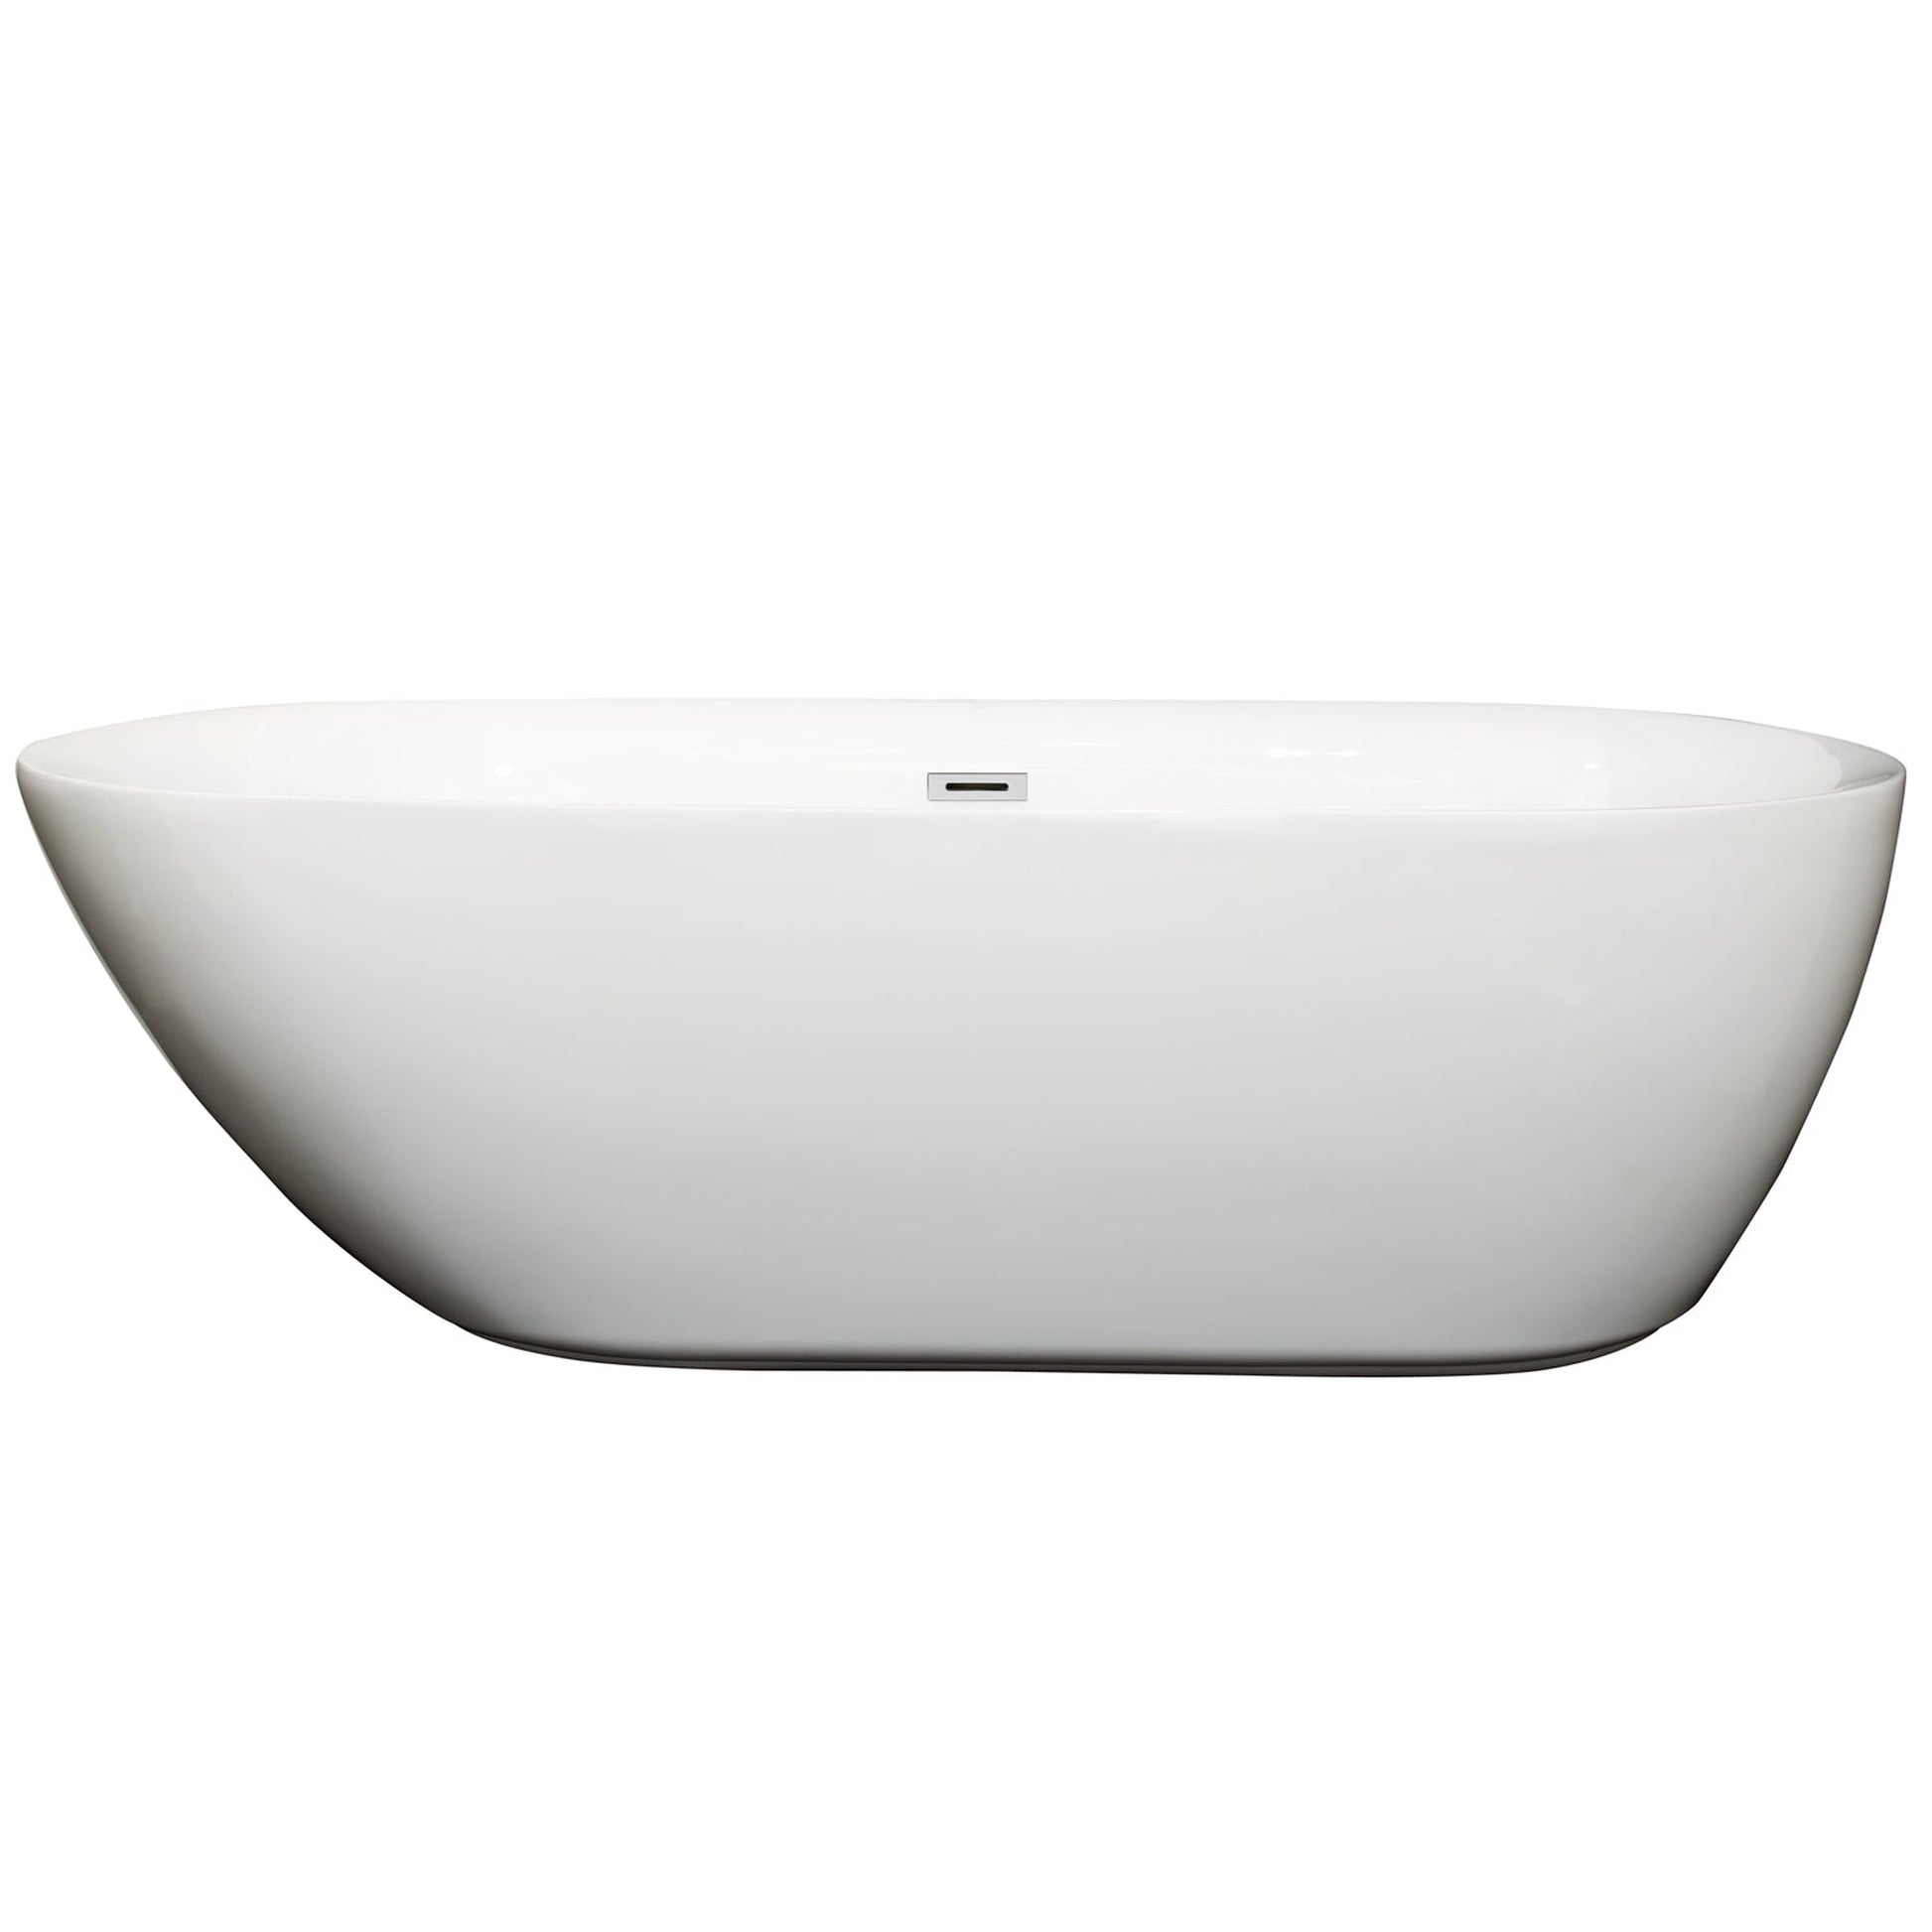 Wyndham Collection Melissa 71" Freestanding Bathtub in White With Polished Chrome Drain and Overflow Trim